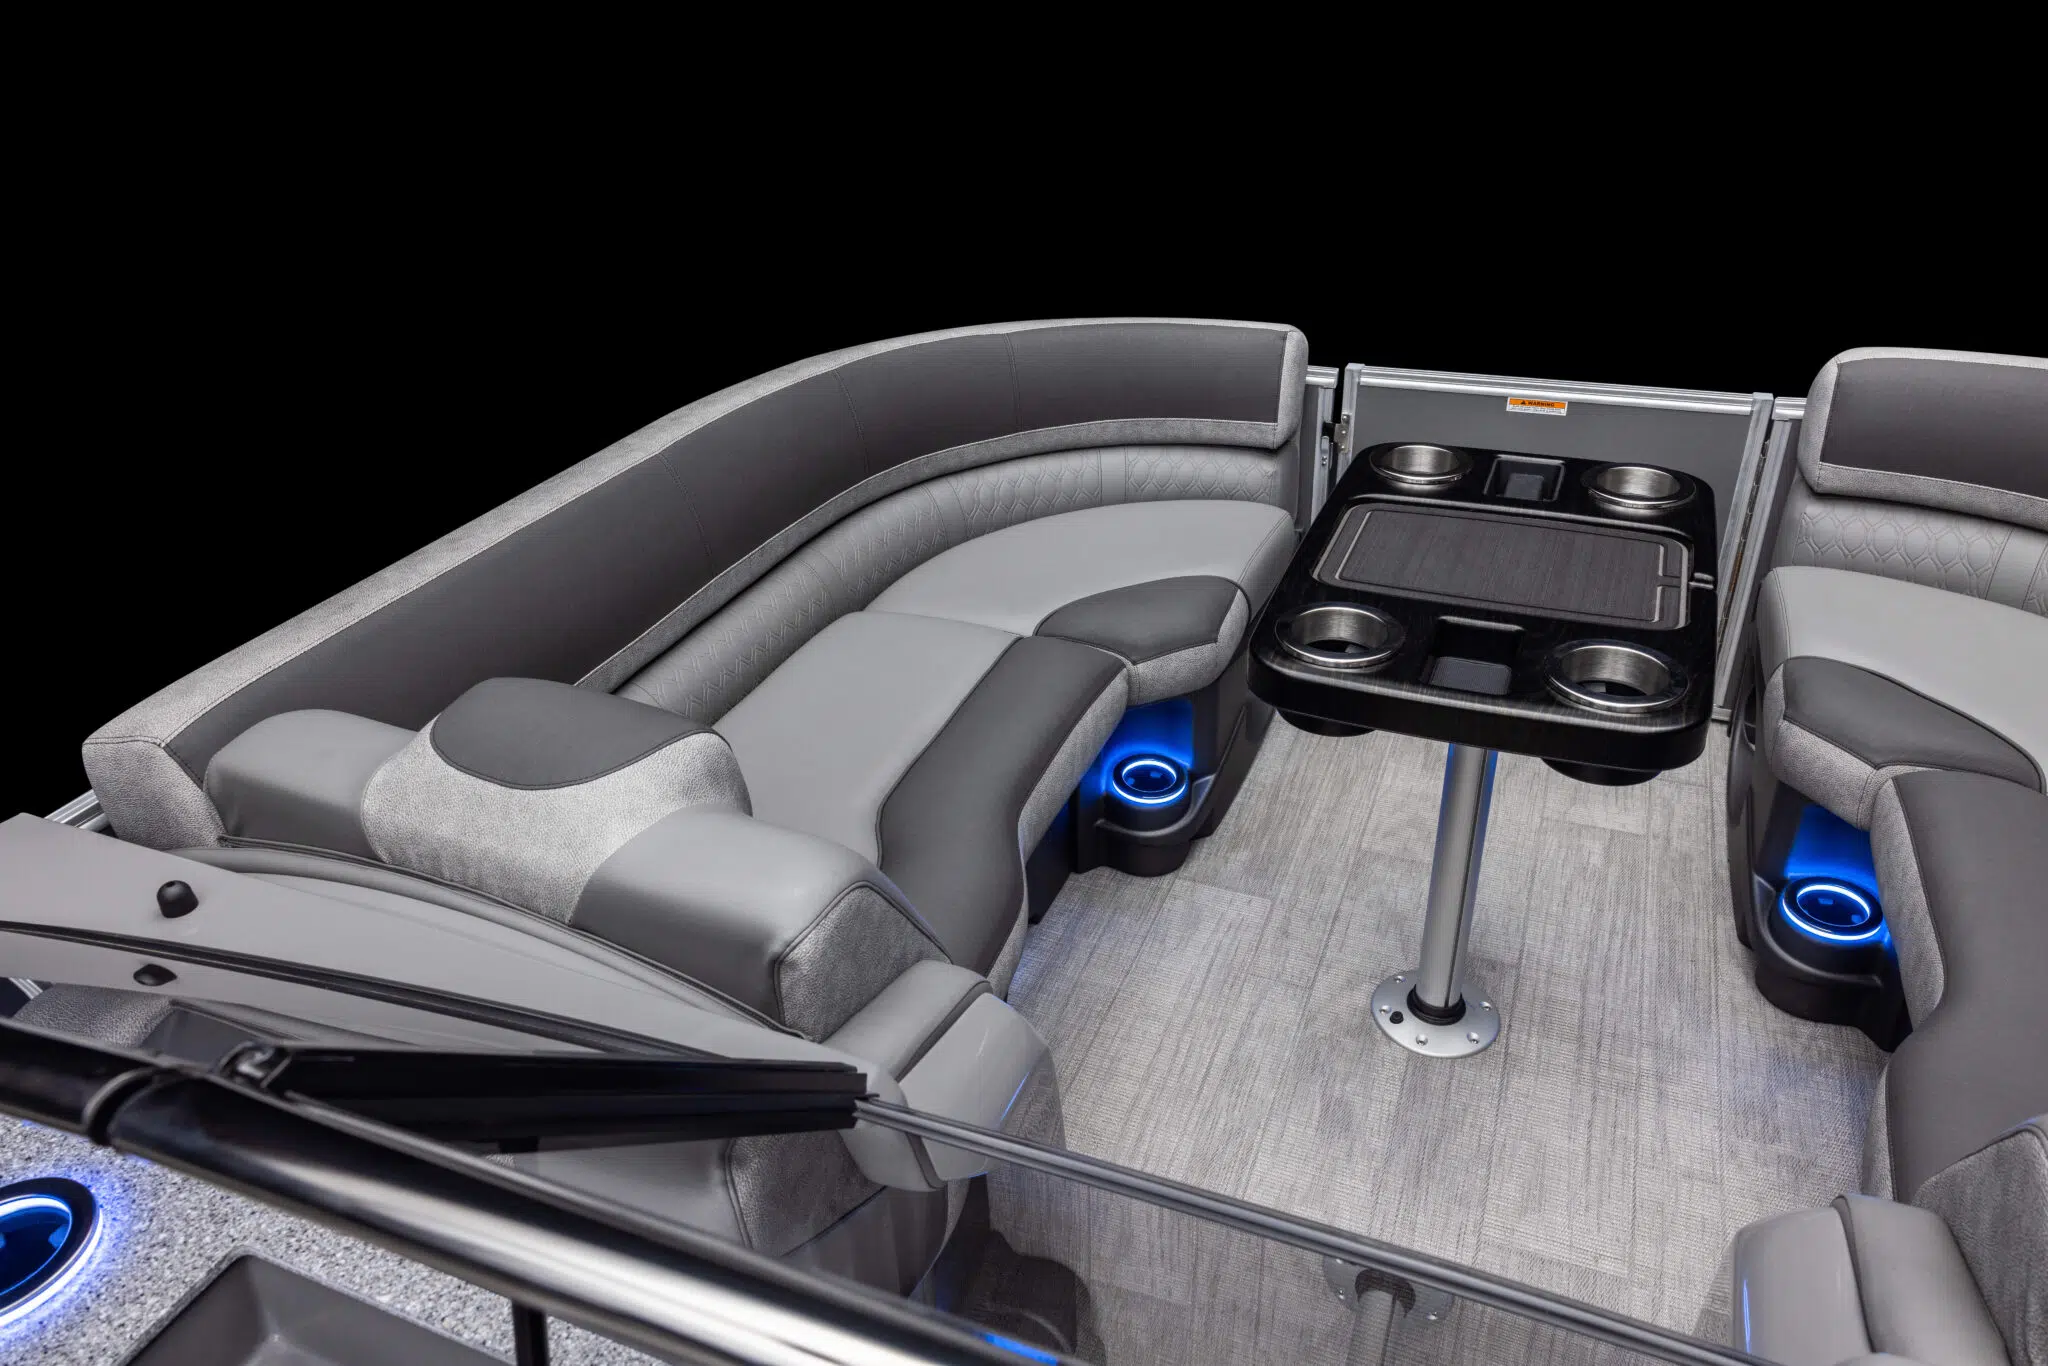 The image shows the interior seating area of a modern luxury pontoon boat, featuring curved gray and black cushioned seats. There is a central table with cup holders, and blue LED accent lighting is visible under the seats, giving the area a sleek, contemporary look.